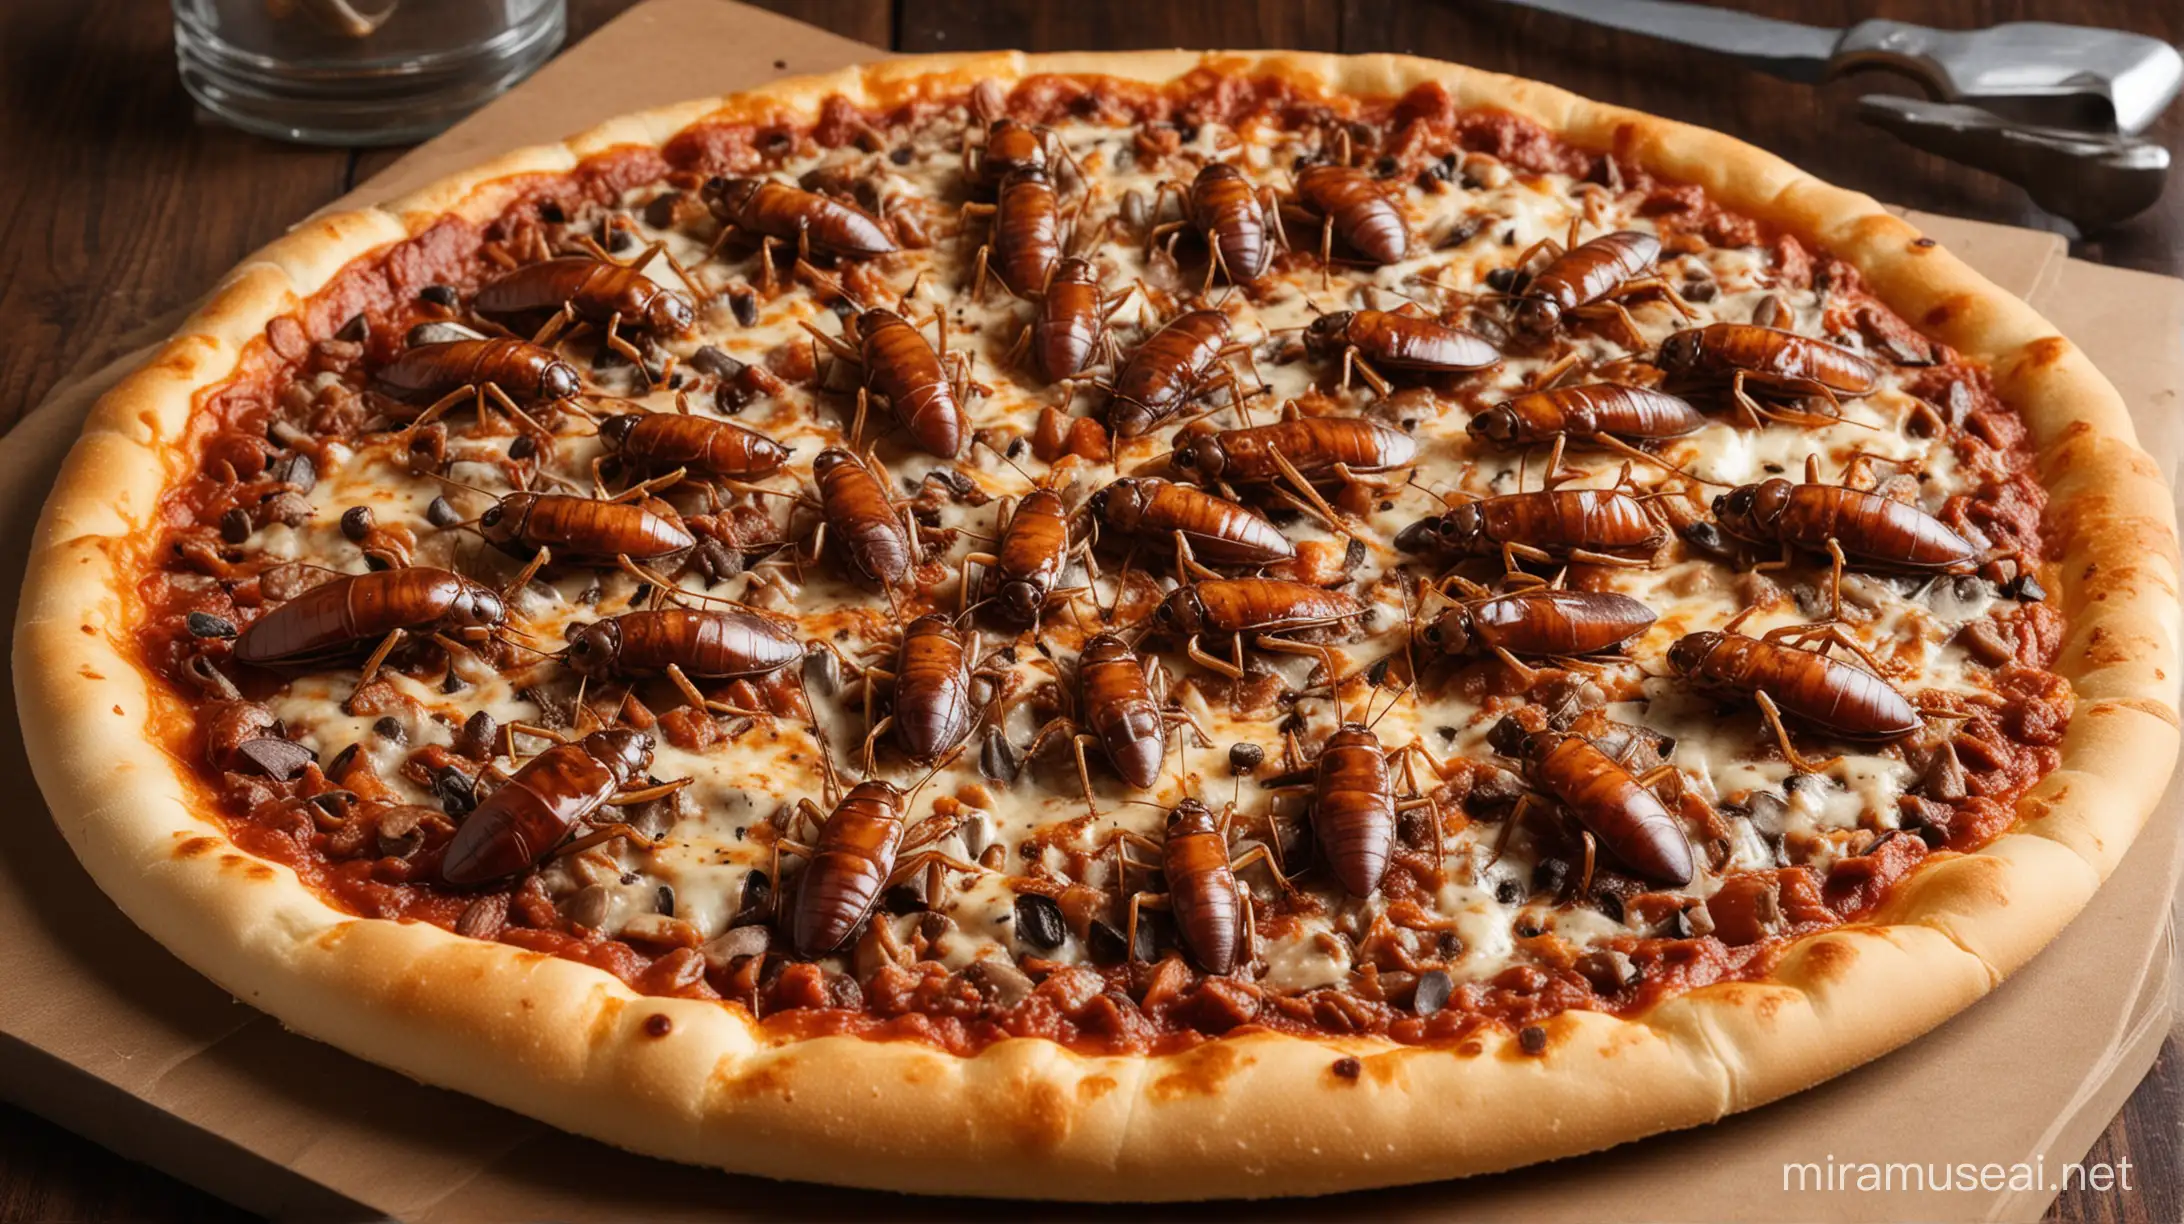 cockroach pizza